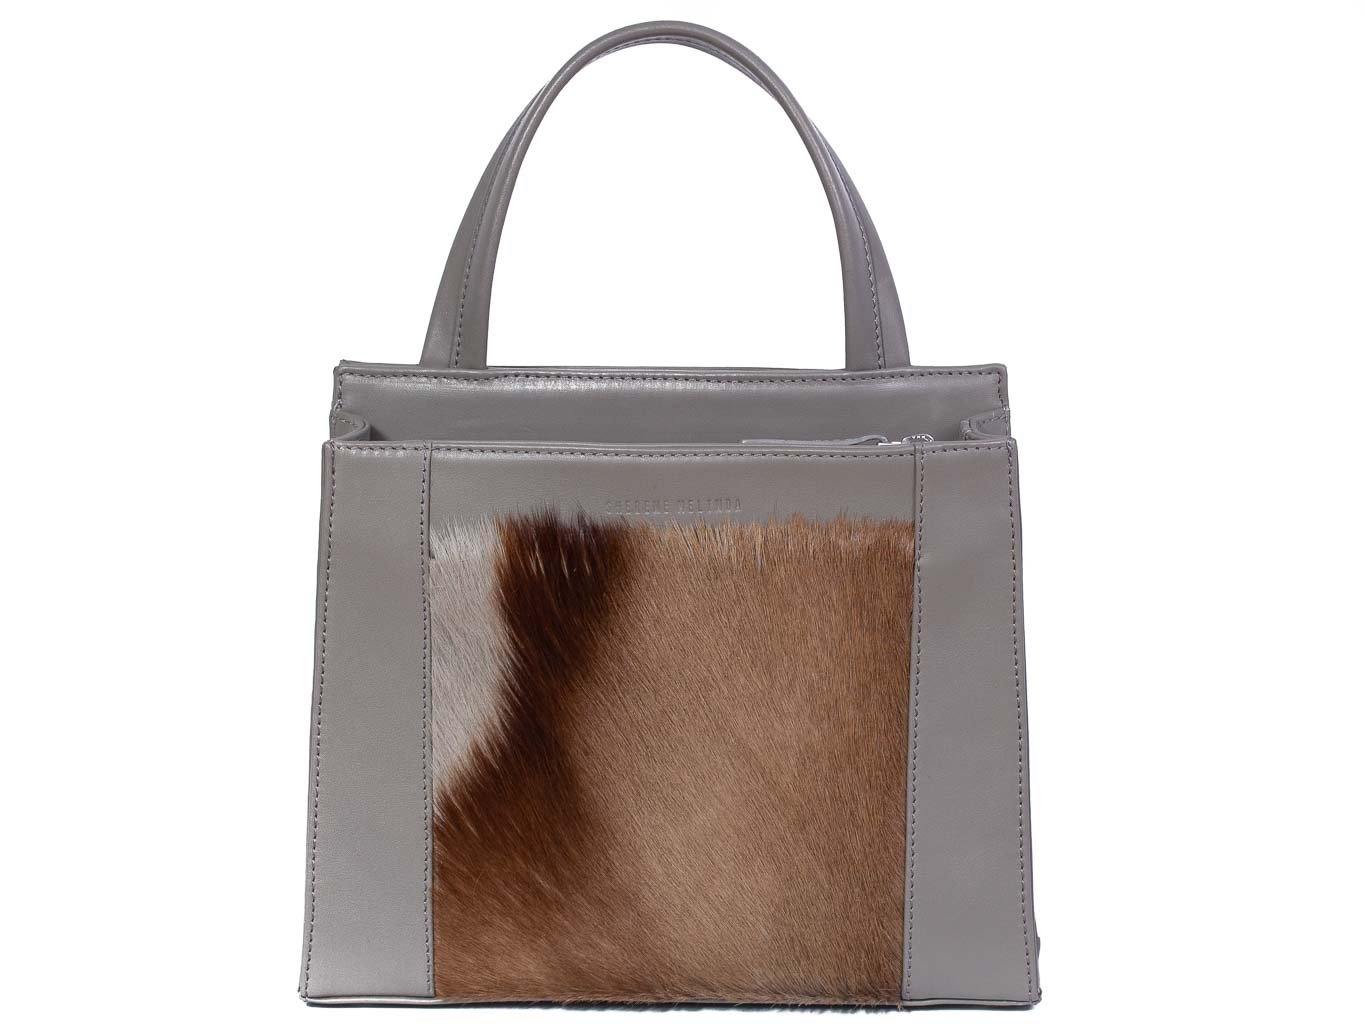 Top Handle Springbok Handbag in Slate Grey with a stripe feature by Sherene Melinda front